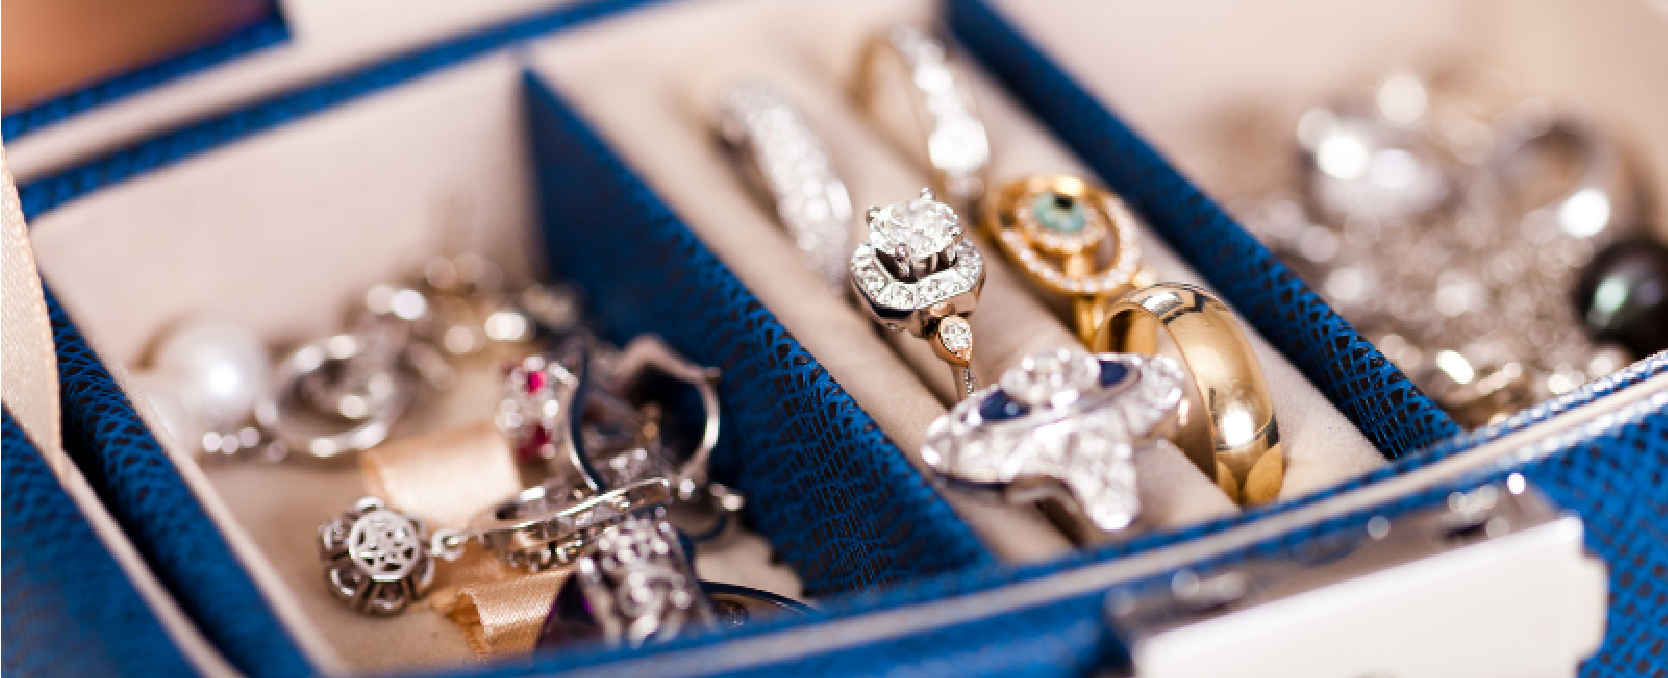 How to Identify Valuable Pieces In Your Jewelry Box | Worthy.com